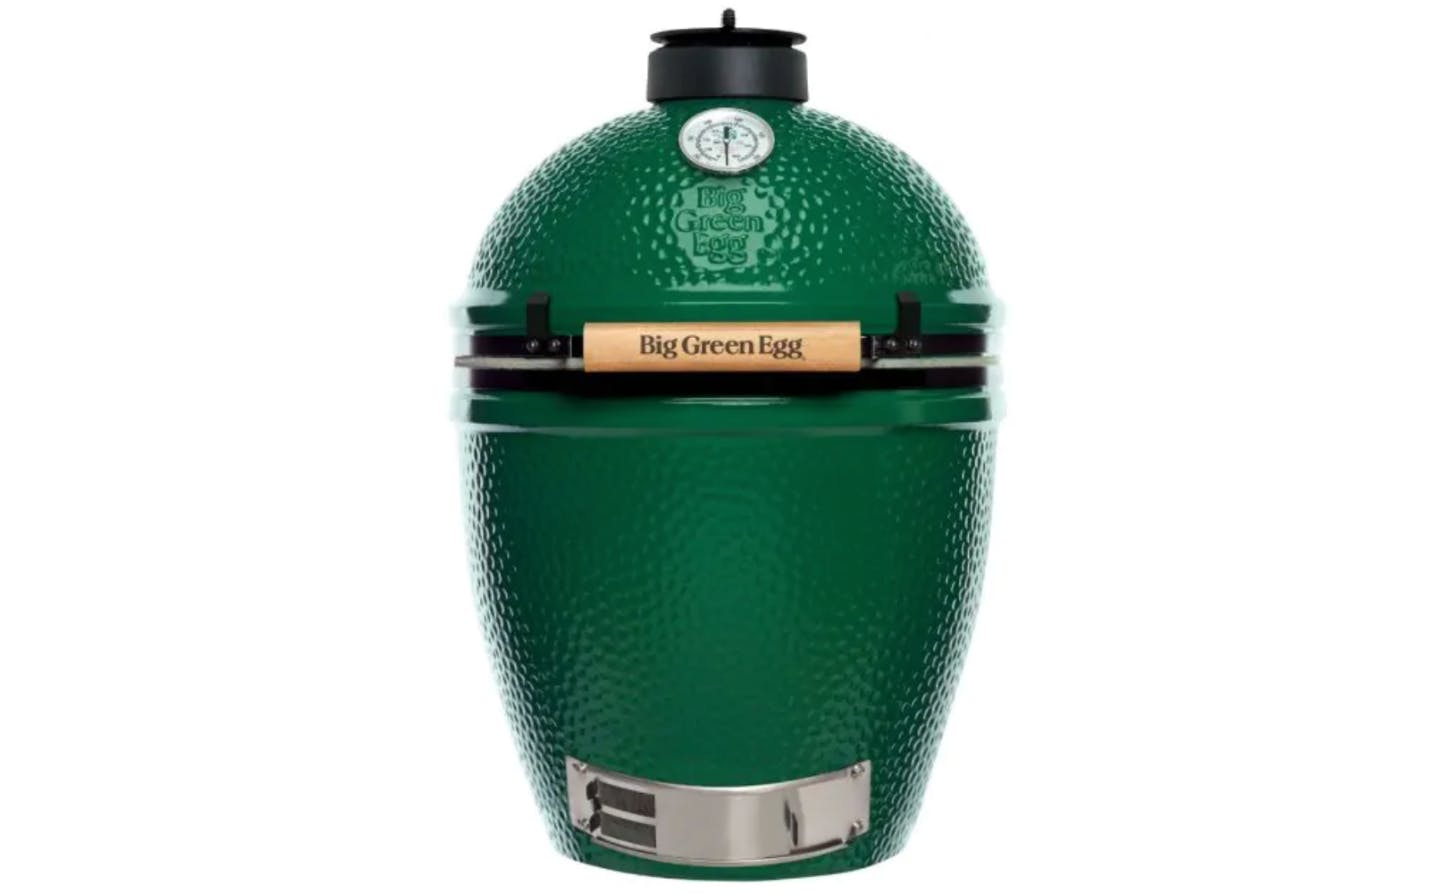 The Big Green Egg grill.